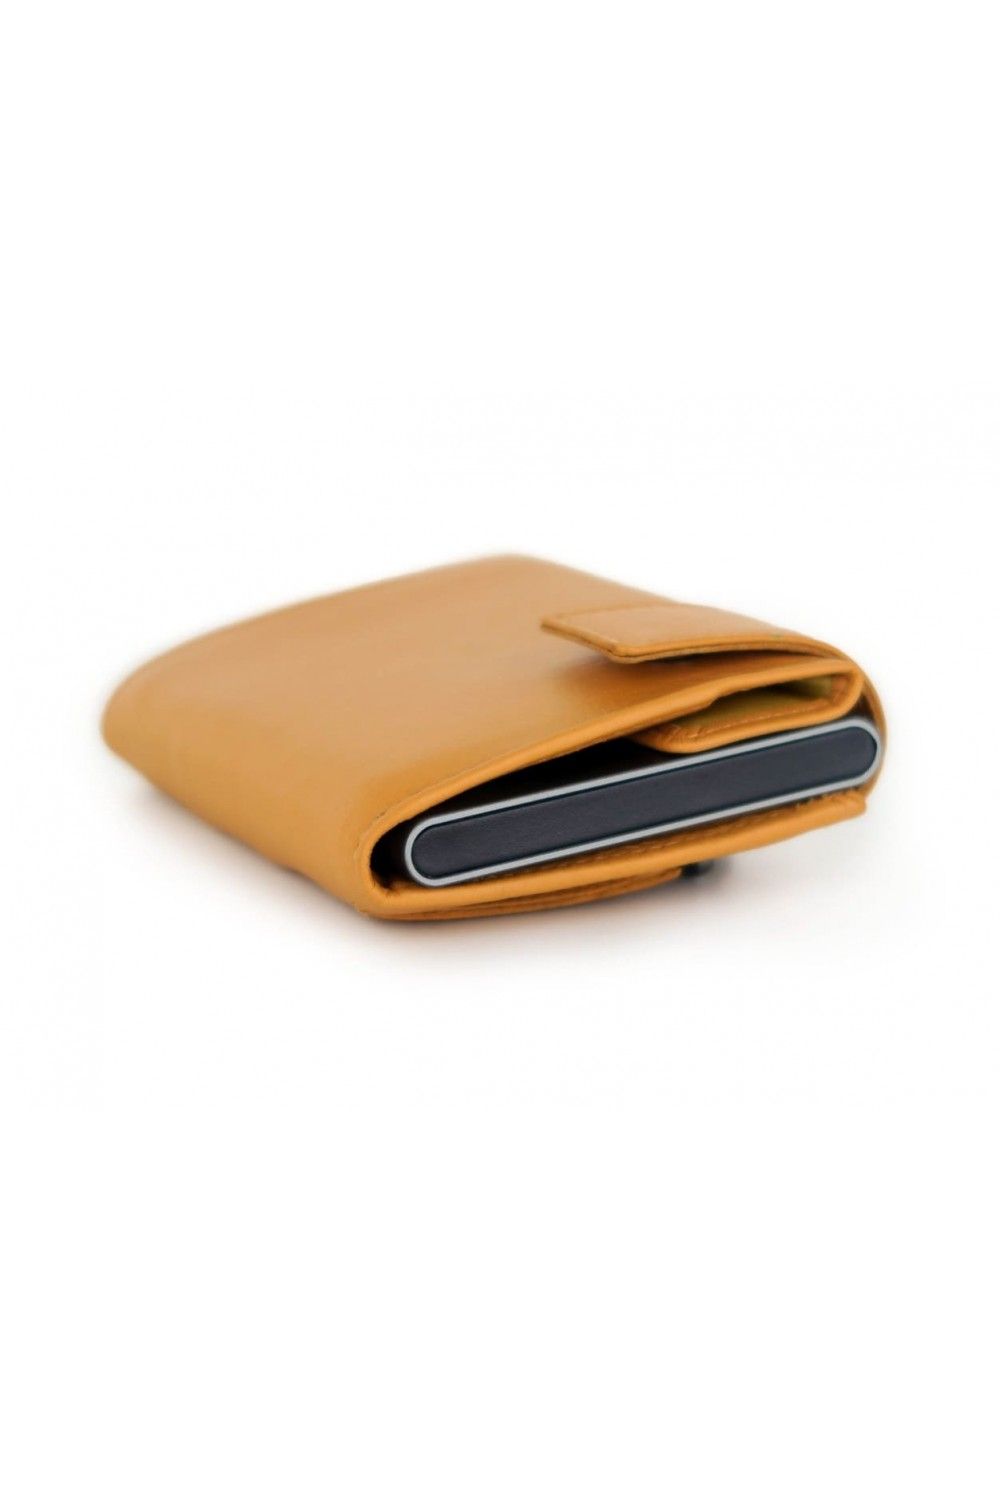 SecWal Card Case RV Leather Yellow